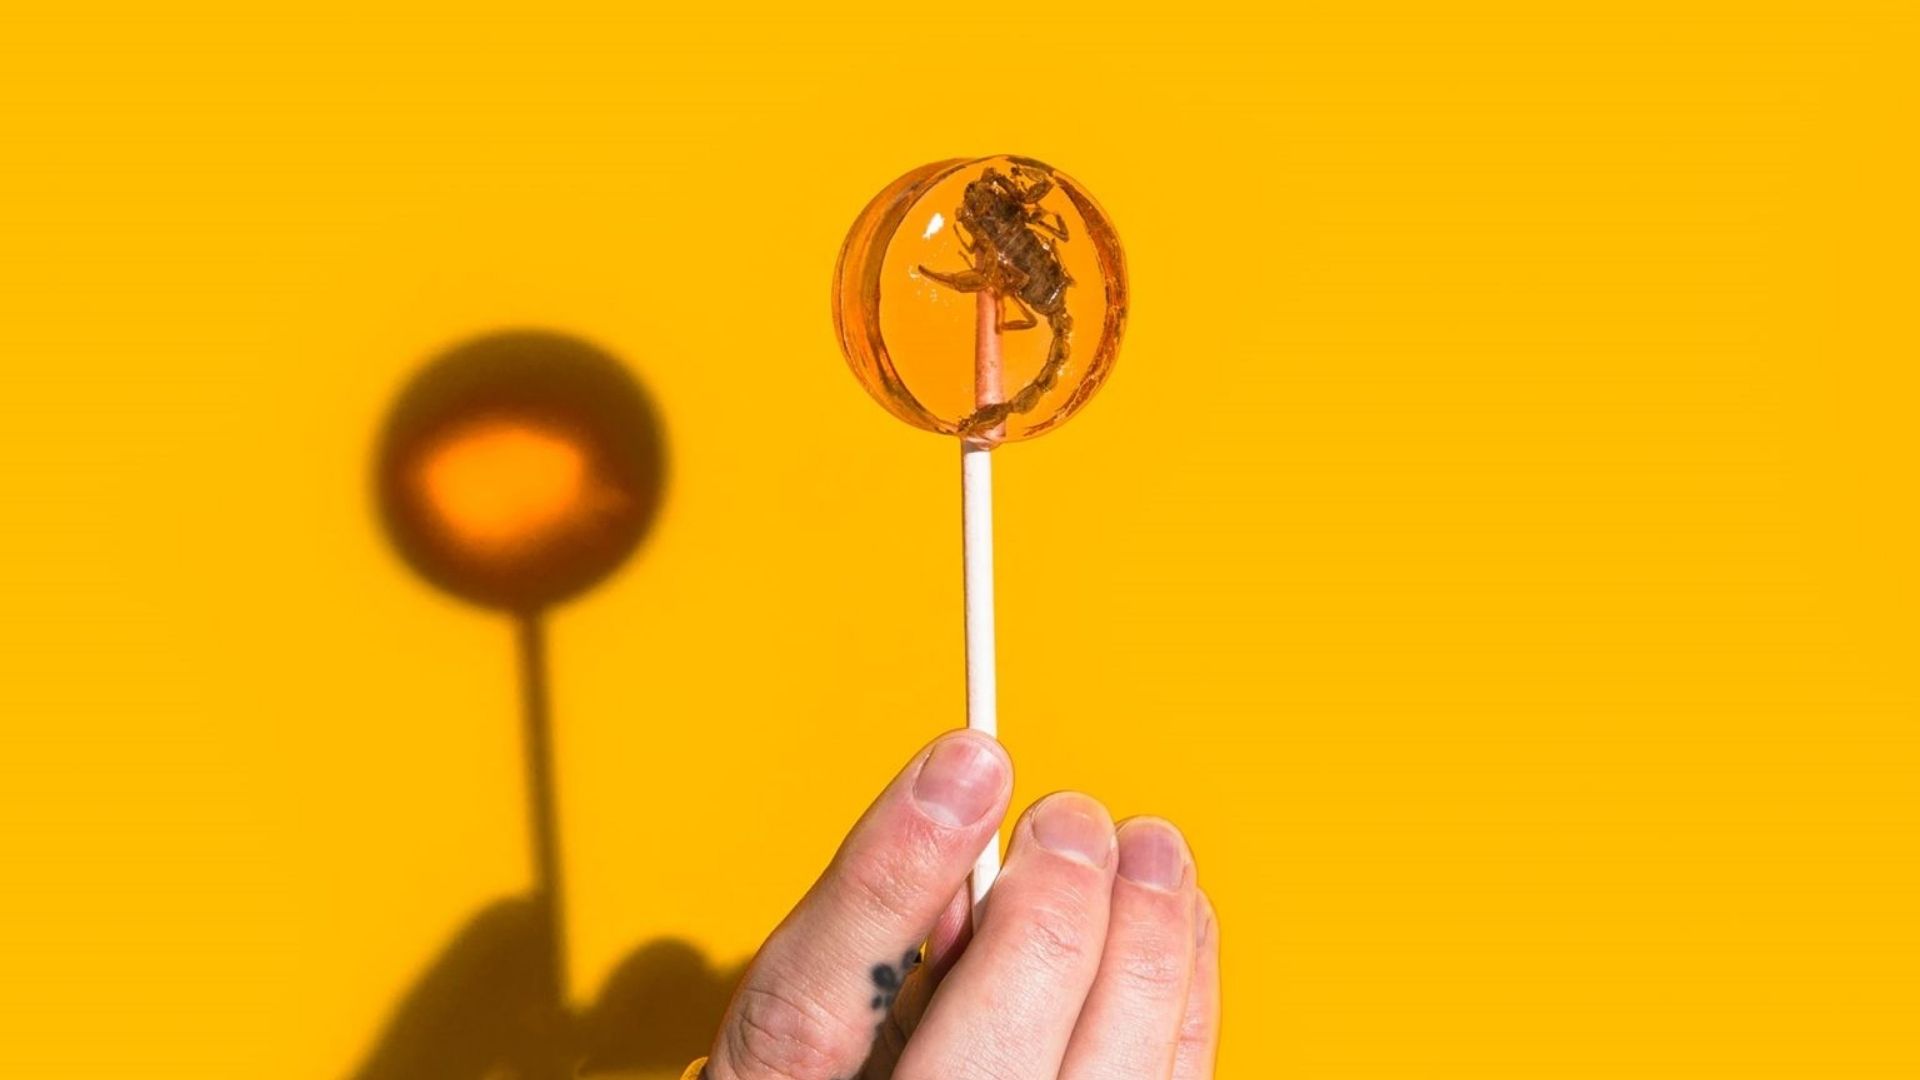 A hand holds a clear lollipop with a scorpion in the centre, the background is yellow.